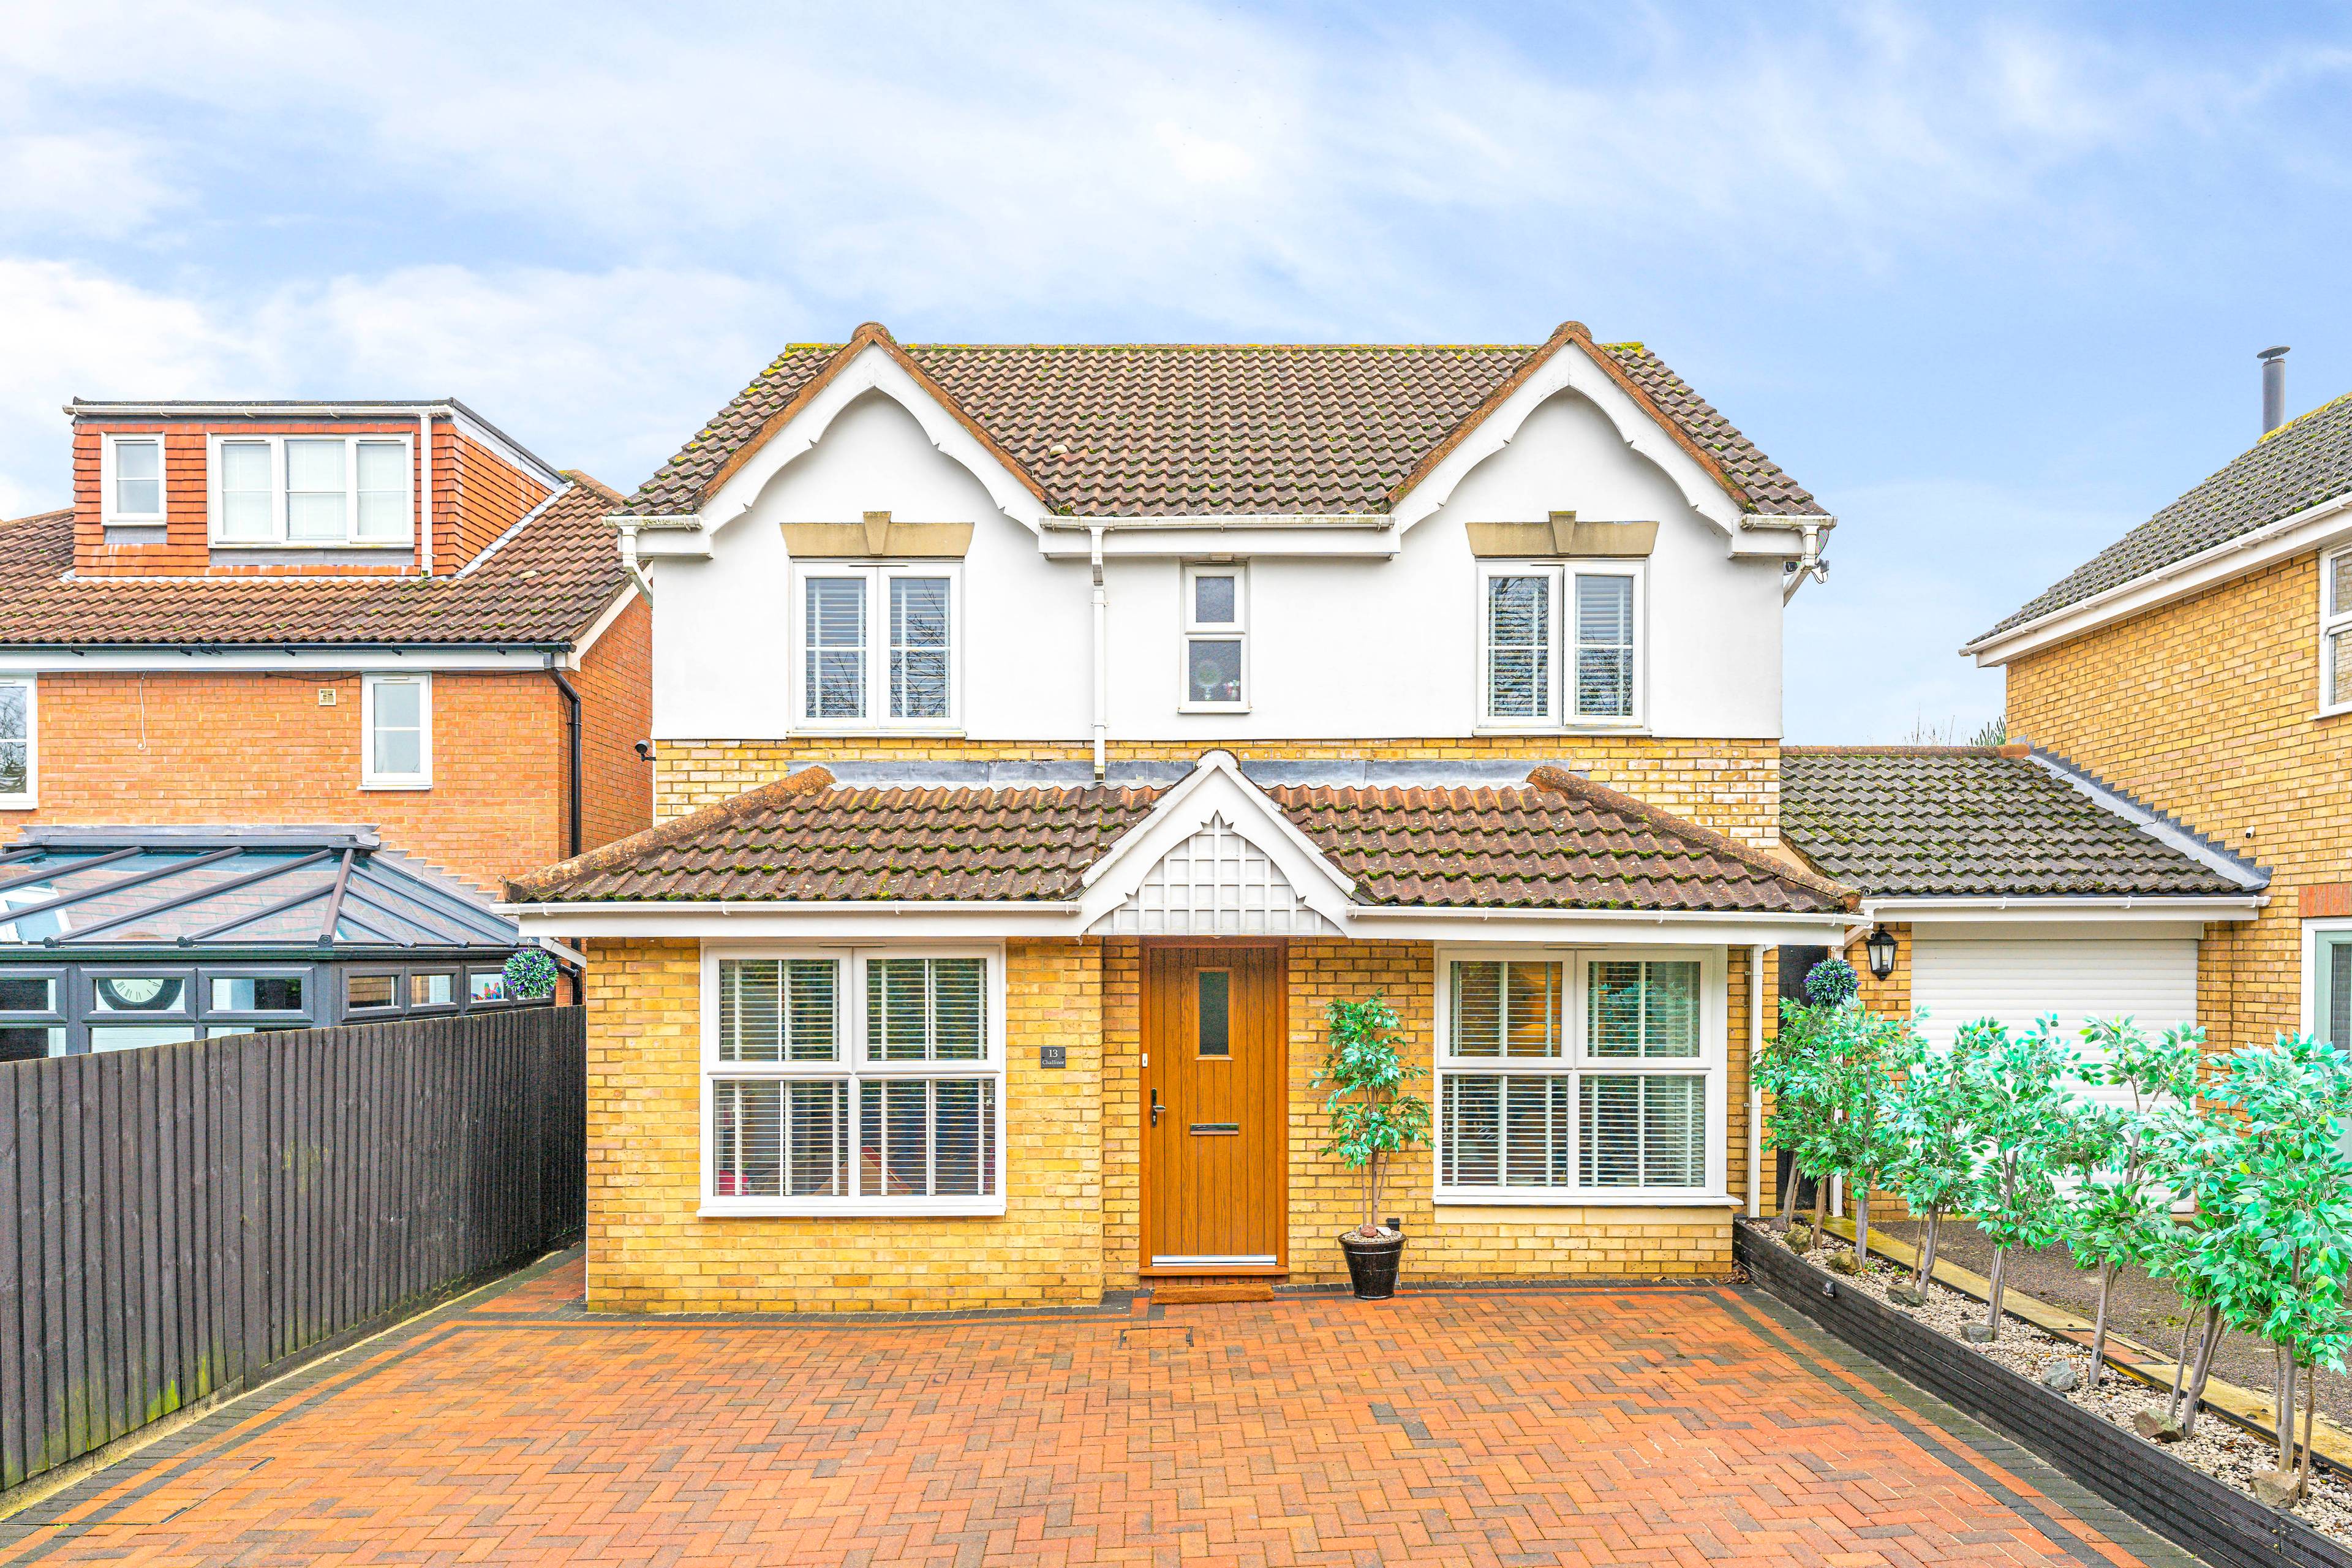 IMMACULATELY PRESENTED, DOUBLE FRONTED, DETACHED HOUSE  ON THE POPULAR CHURCH  LANGLEY DEVELOPMENT